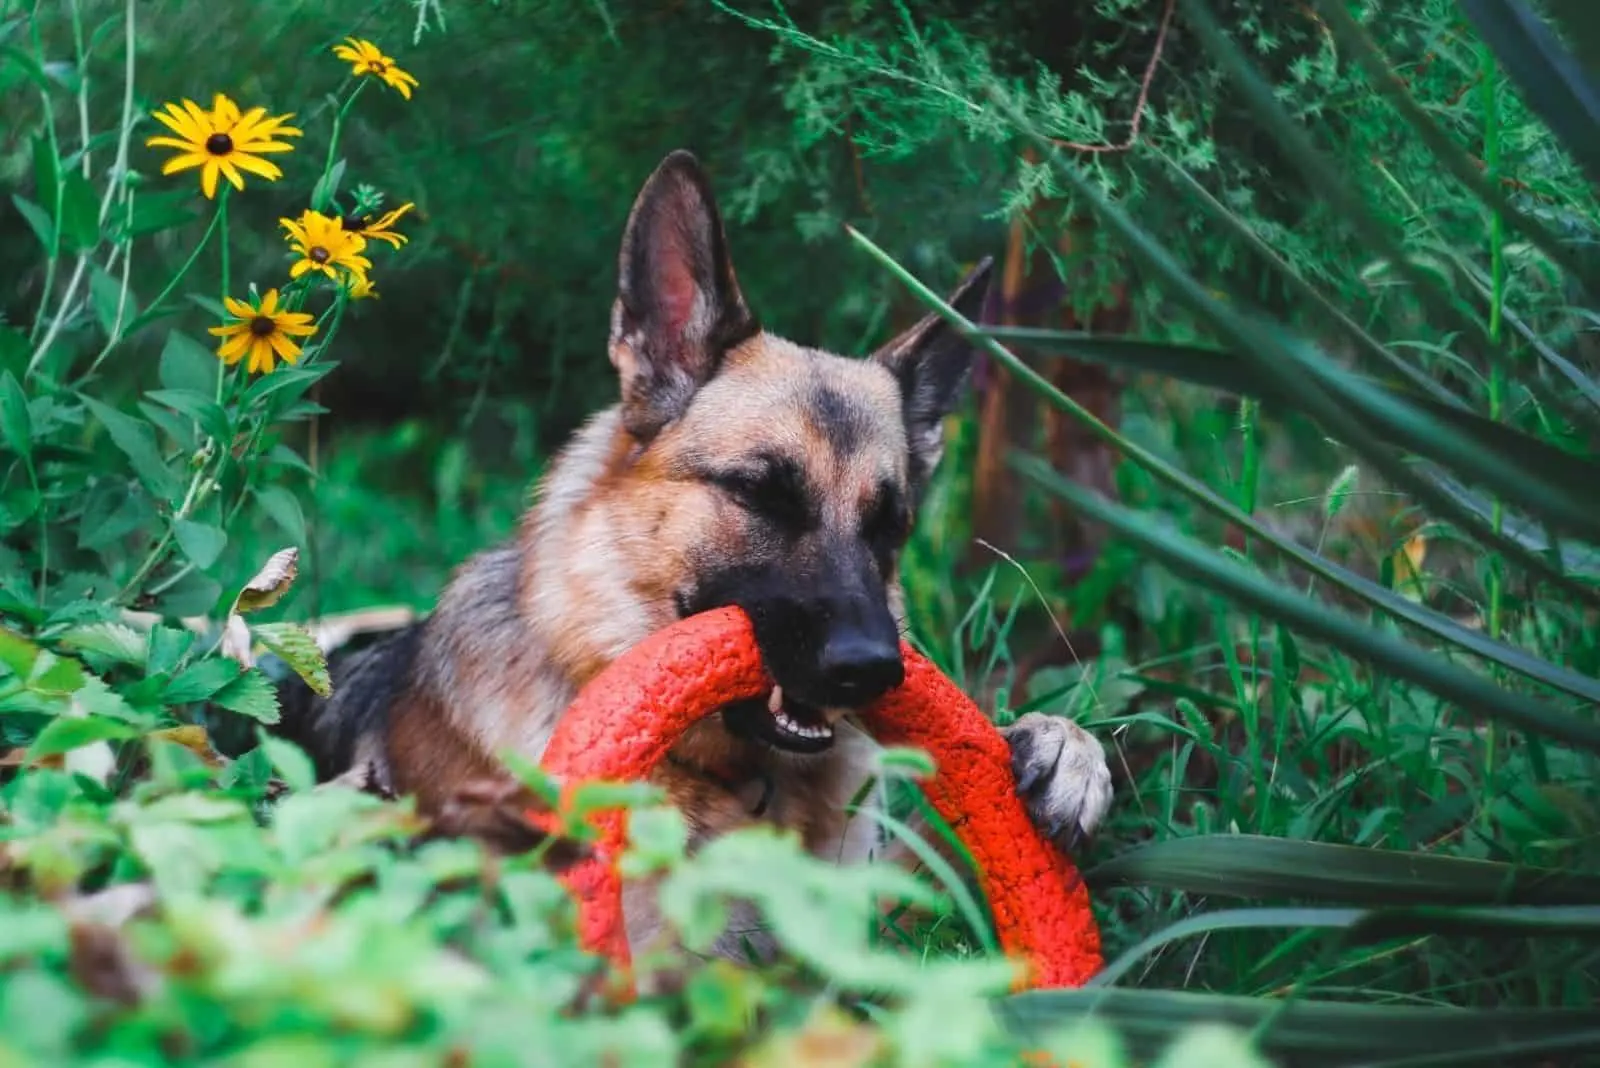 german shepherds plays with a toy